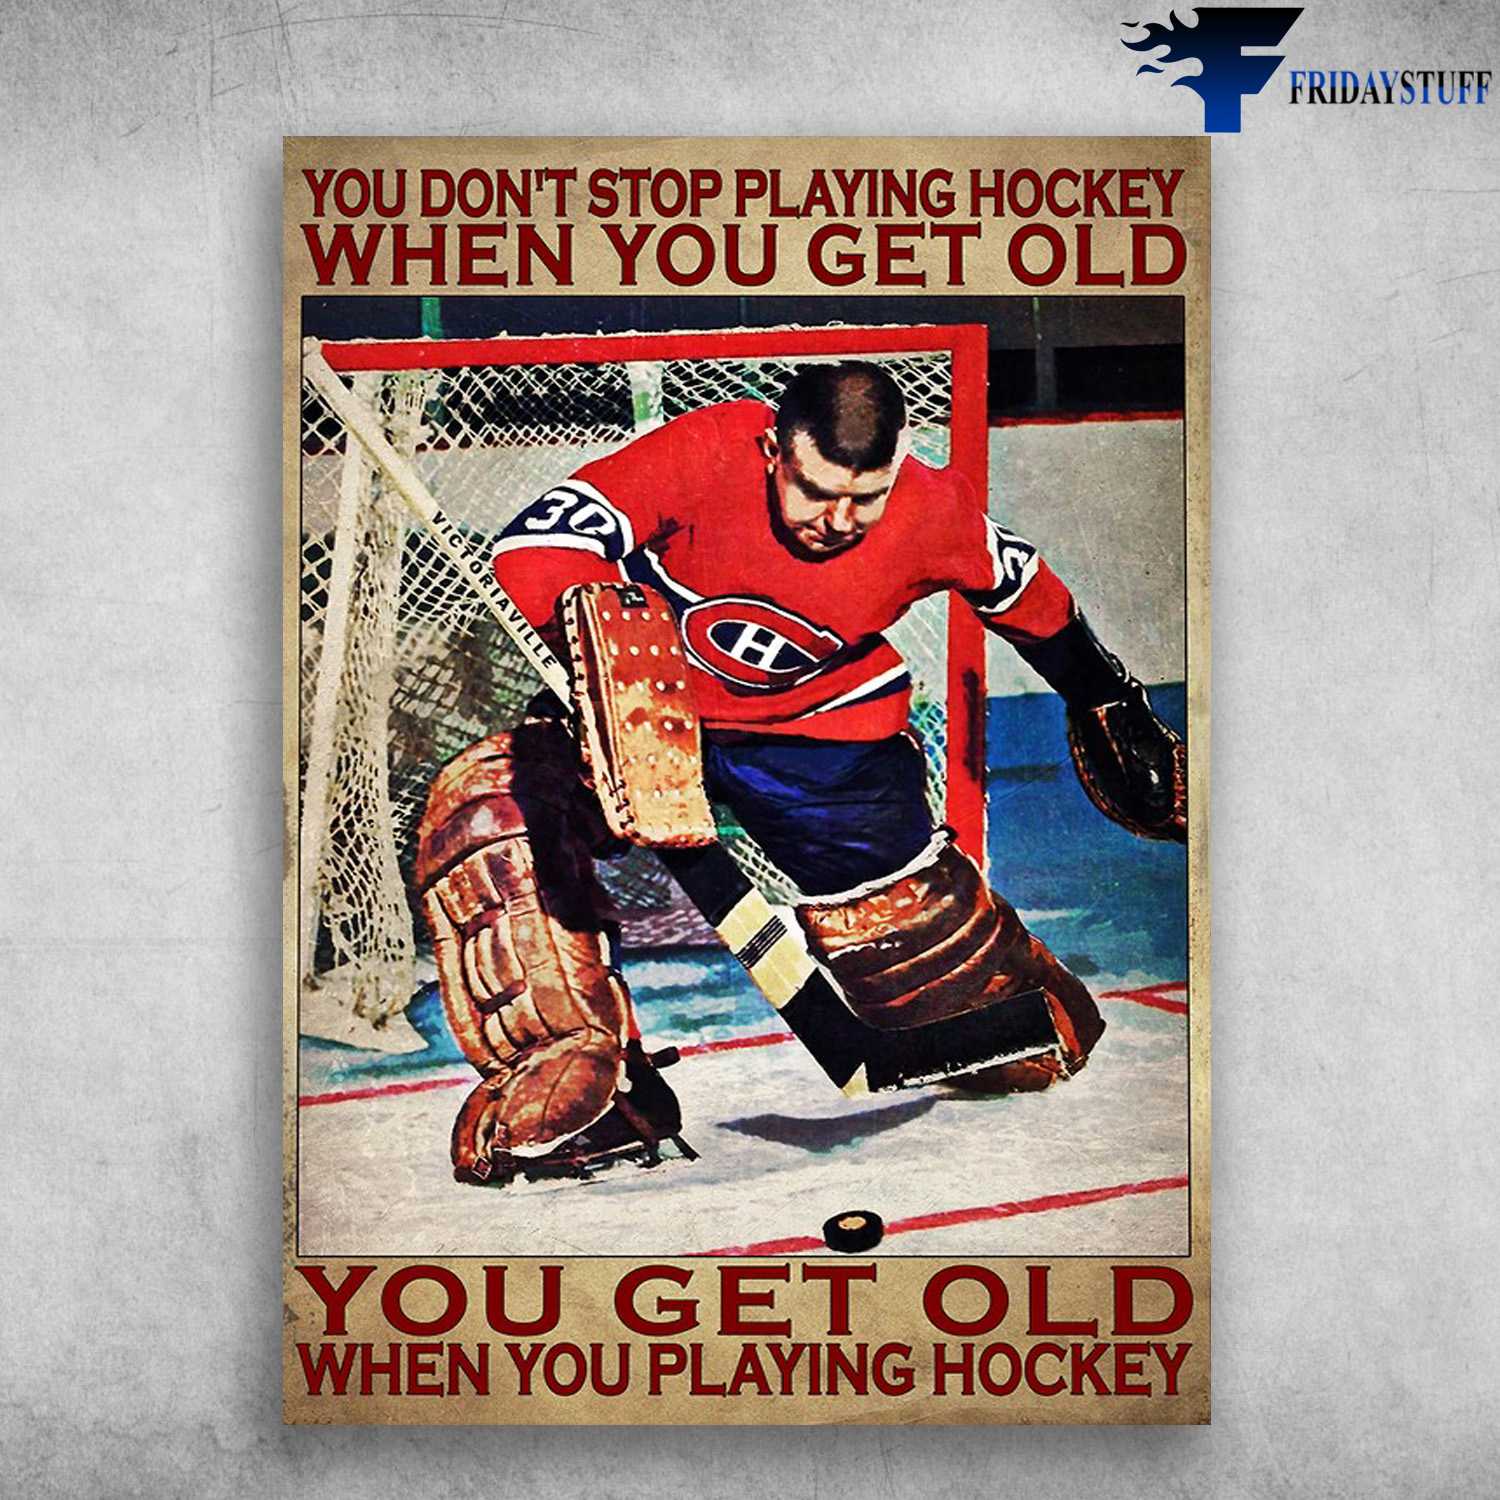 Hockey Goalie - You Don't Playing Hockey When You Get Old, You Get Old When You Playing Hockey, Hockey Player